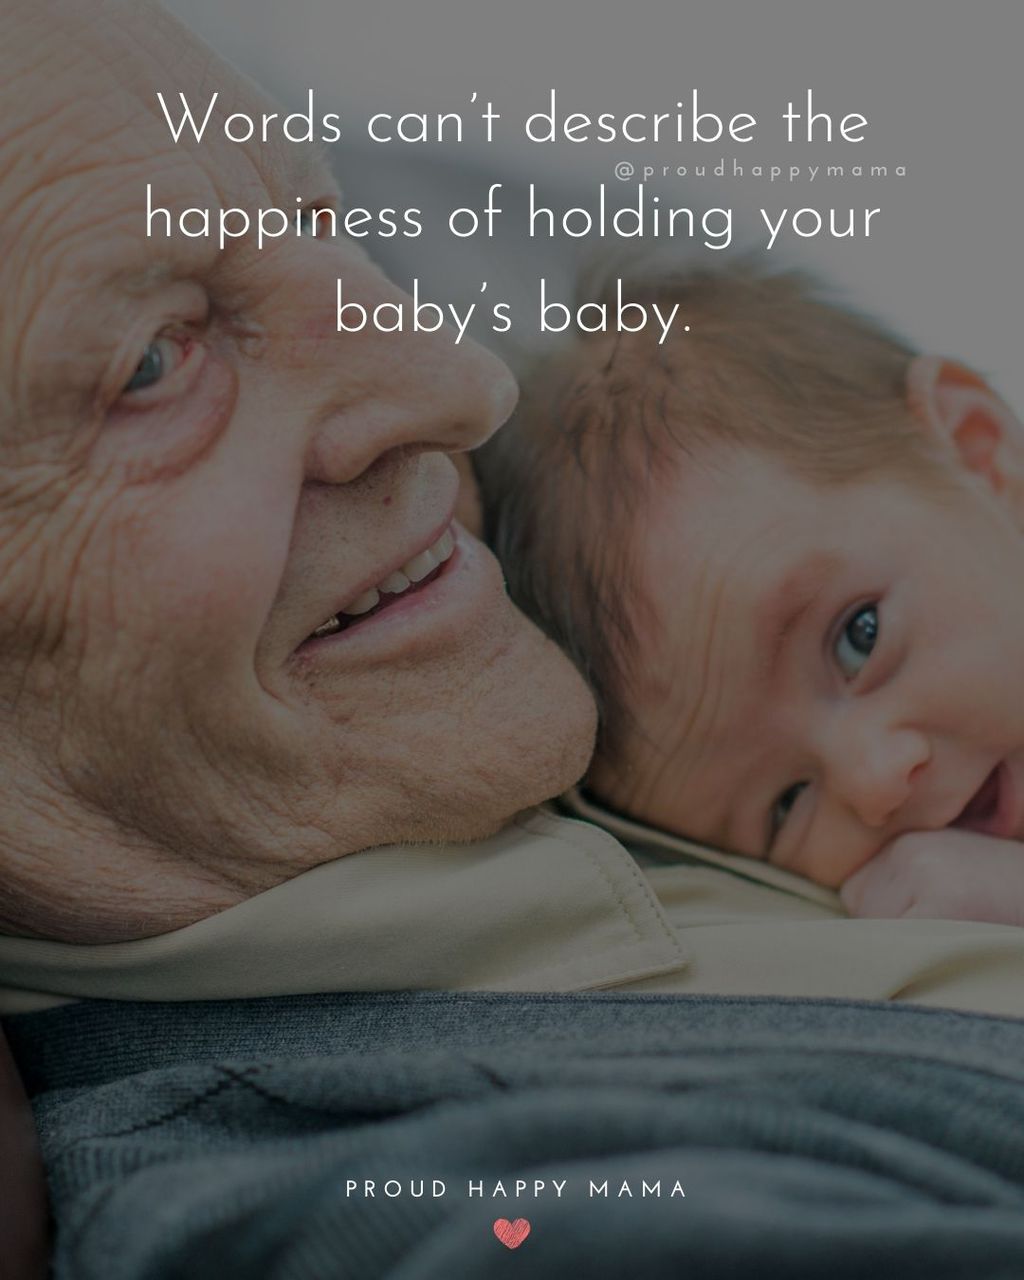 Quotes for Grandchildren - Words cant describe the happiness of holding your babys baby.